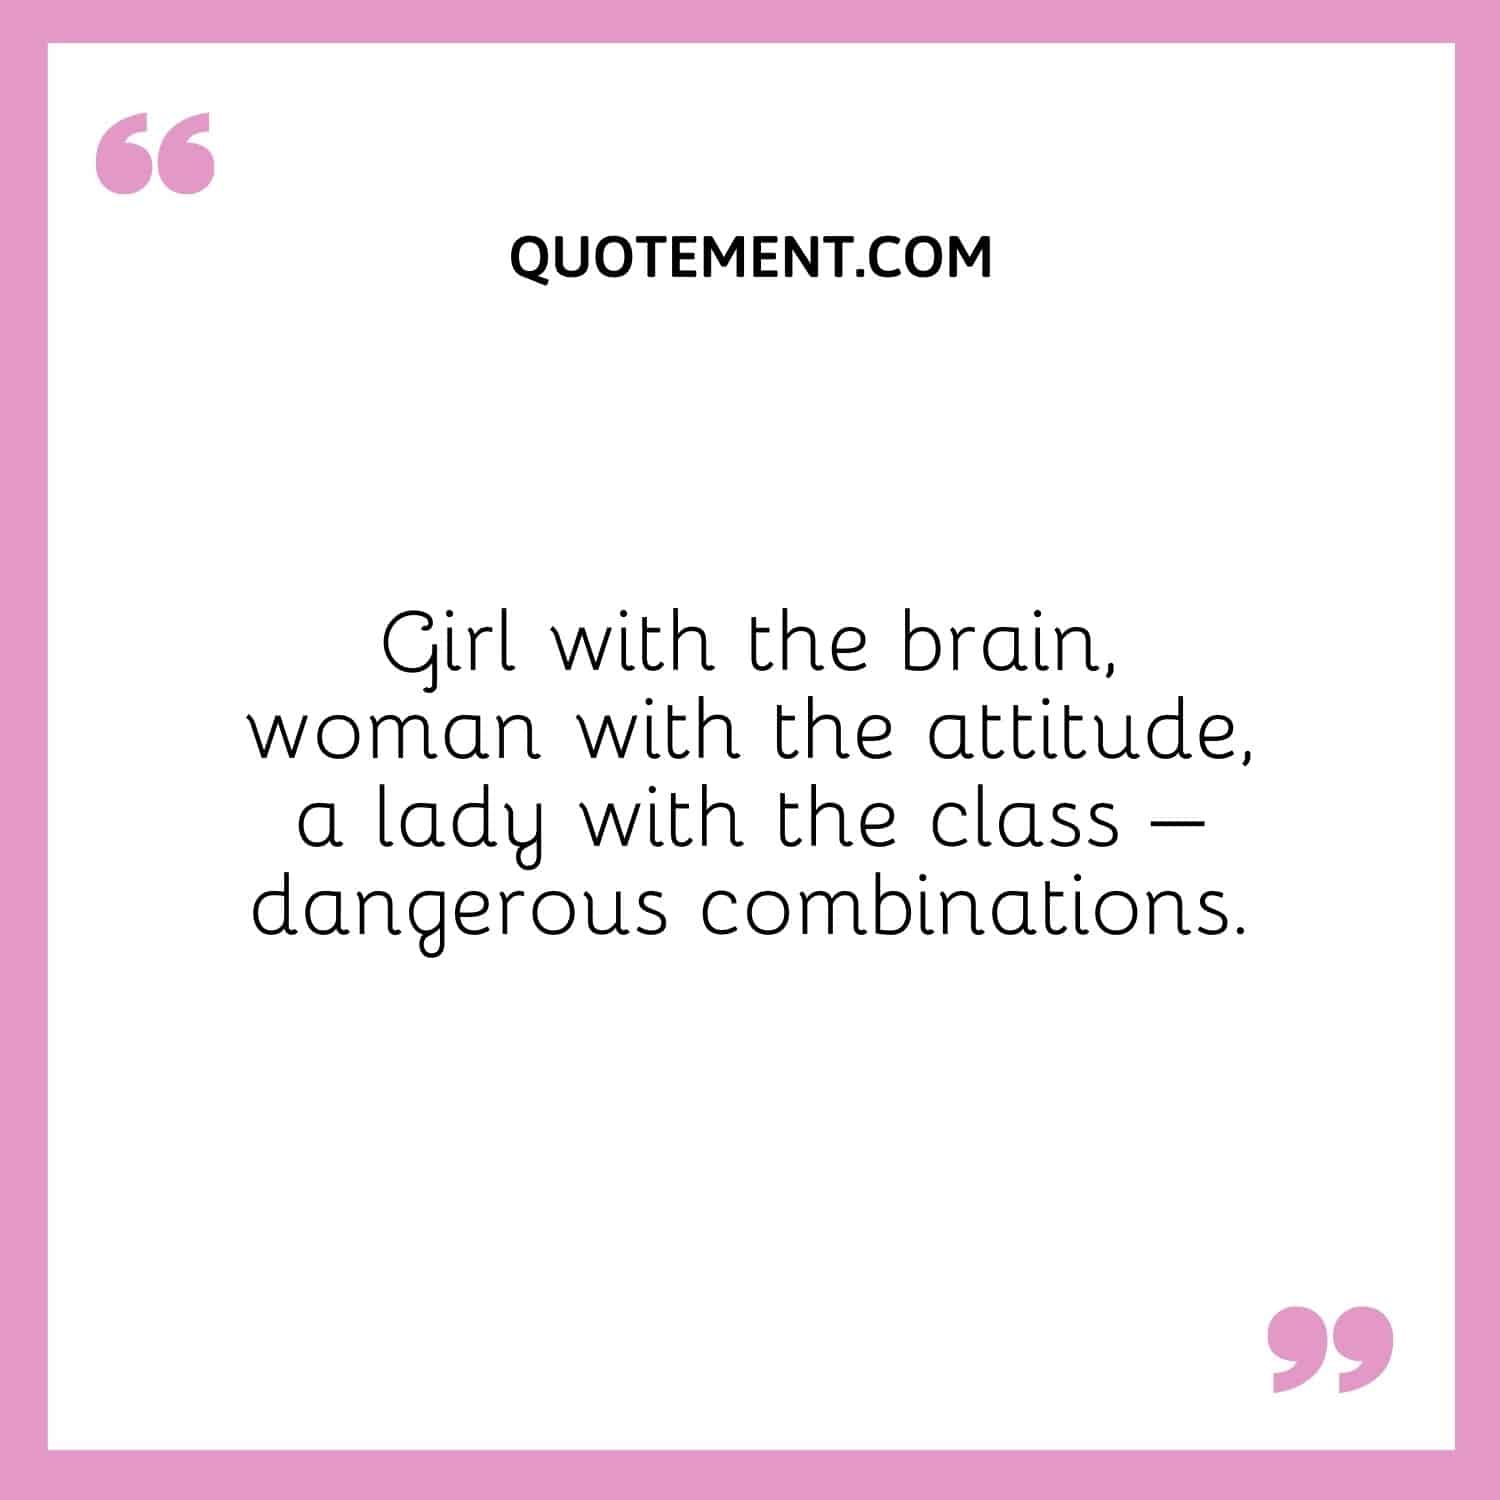 Girl with the brain, woman with the attitude, a lady with the class – dangerous combinations.